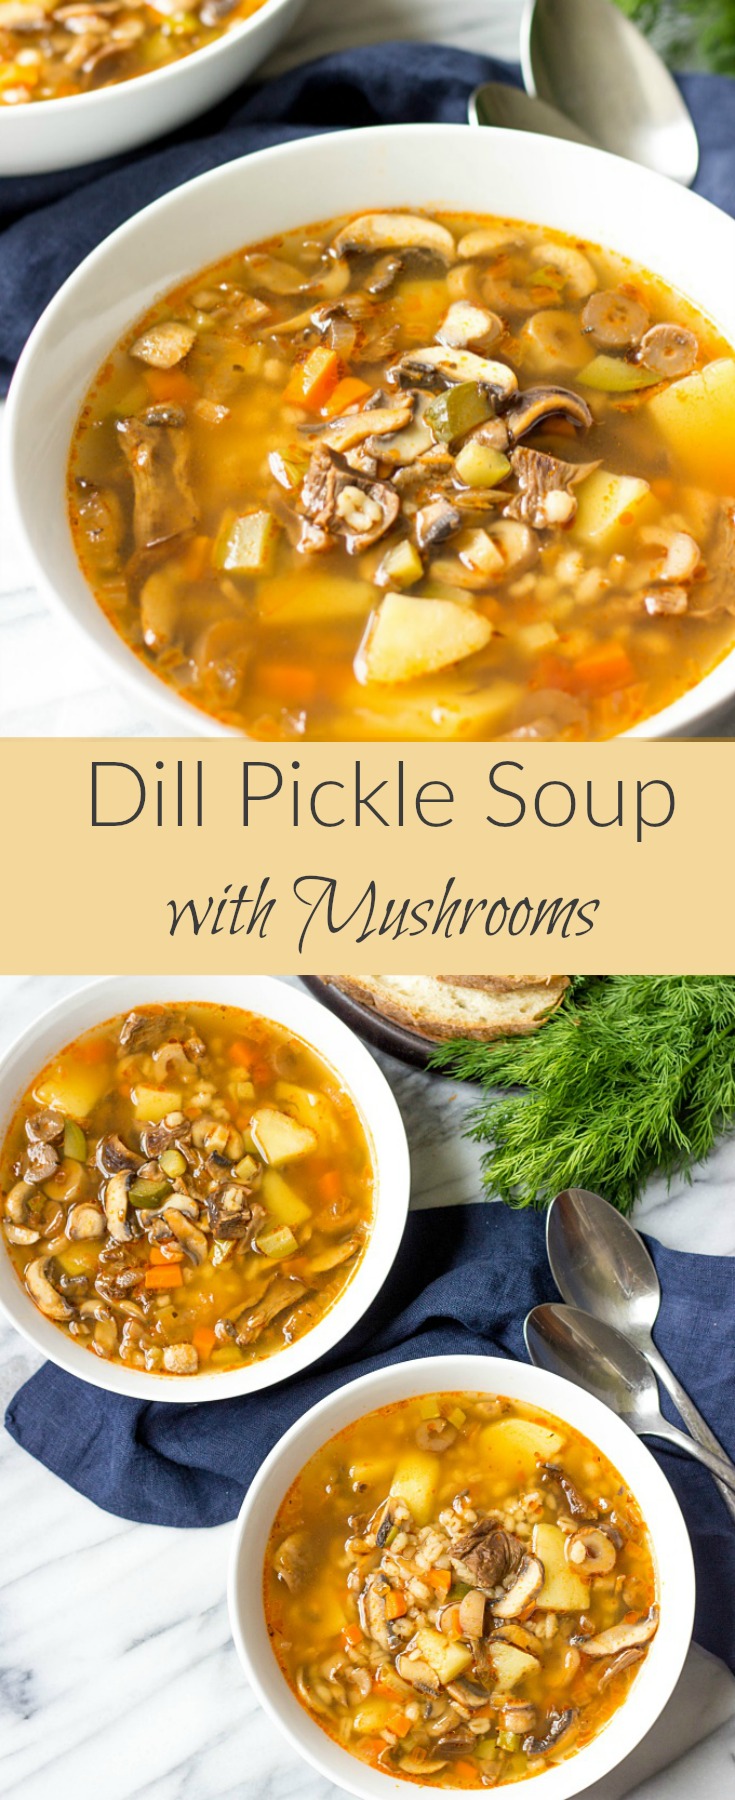 Delicious and flavorful bowl of comfort is right here. This Dill Pickle Soup is easy to prepare and is packed with some unexpected ingredients.